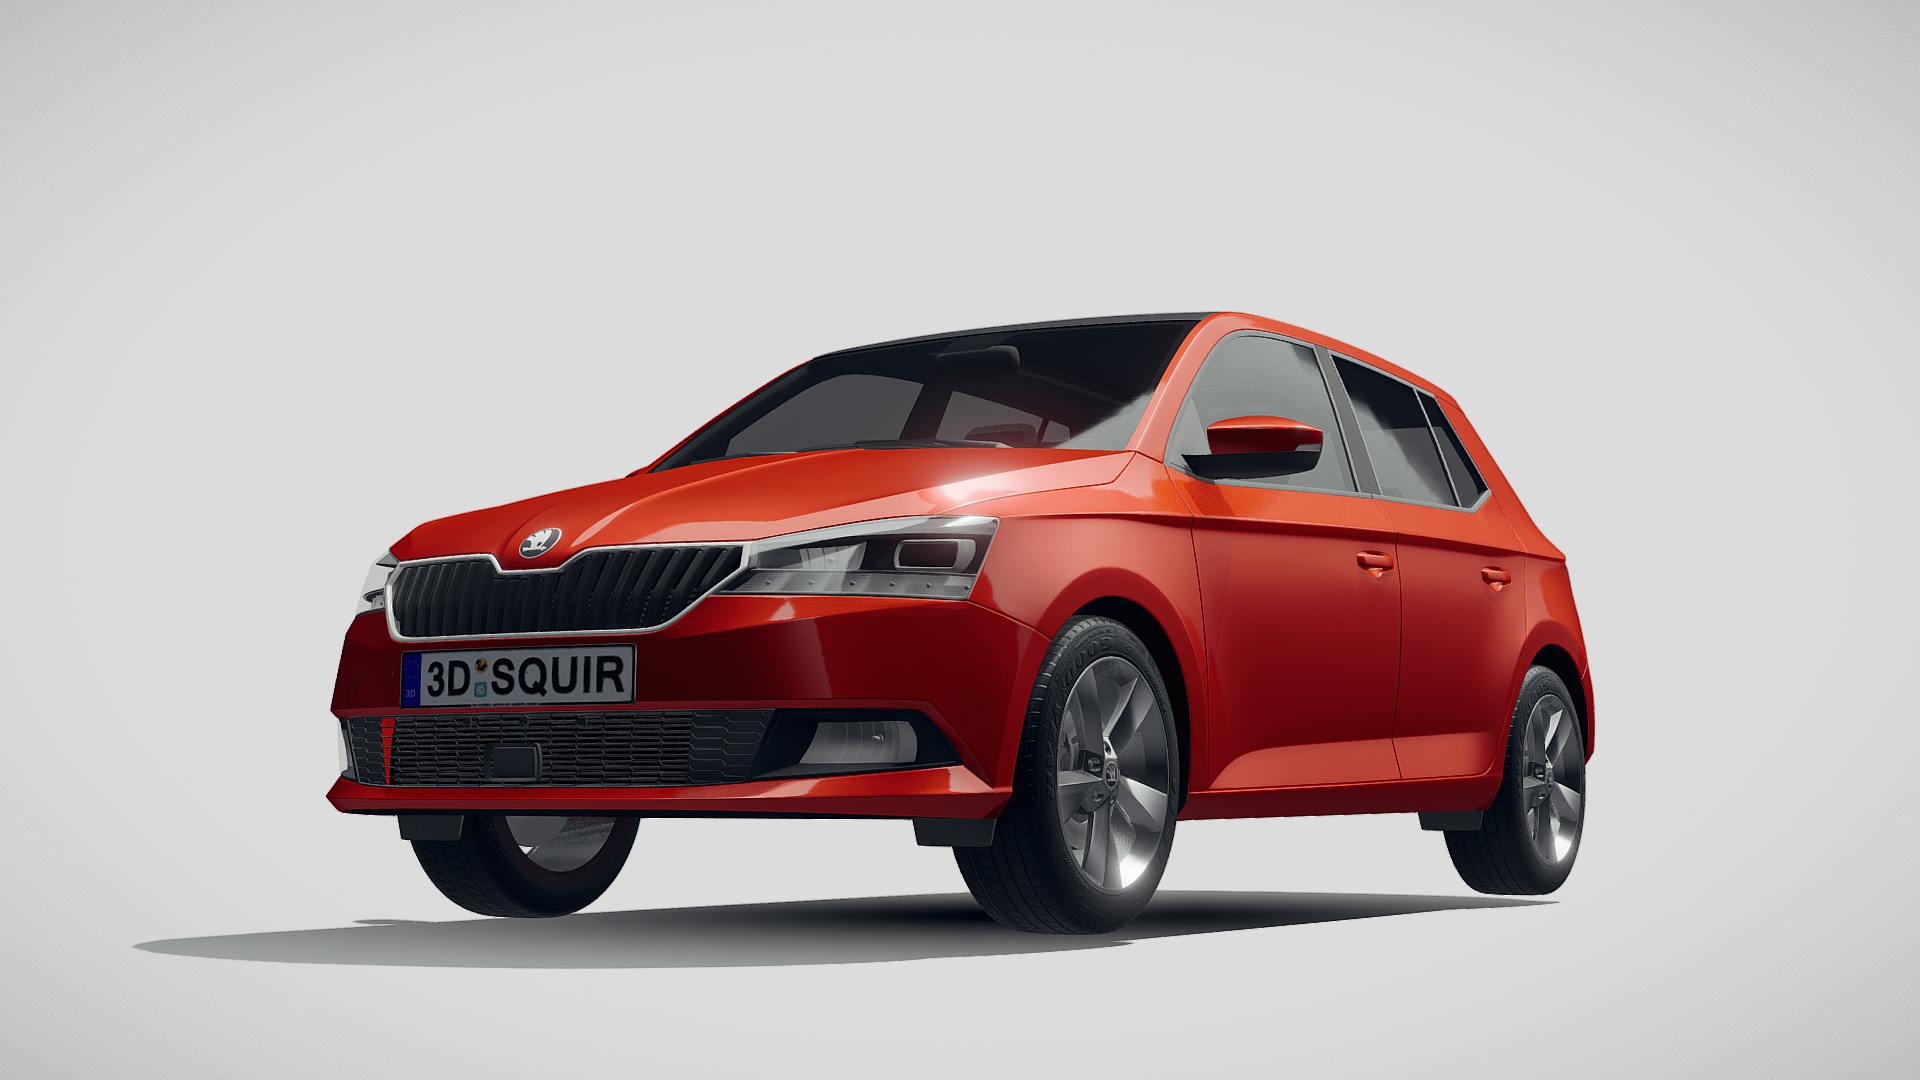 3D model Skoda Fabia 2019 - This is a 3D model of the Skoda Fabia 2019. The 3D model is about a red car with a white background.